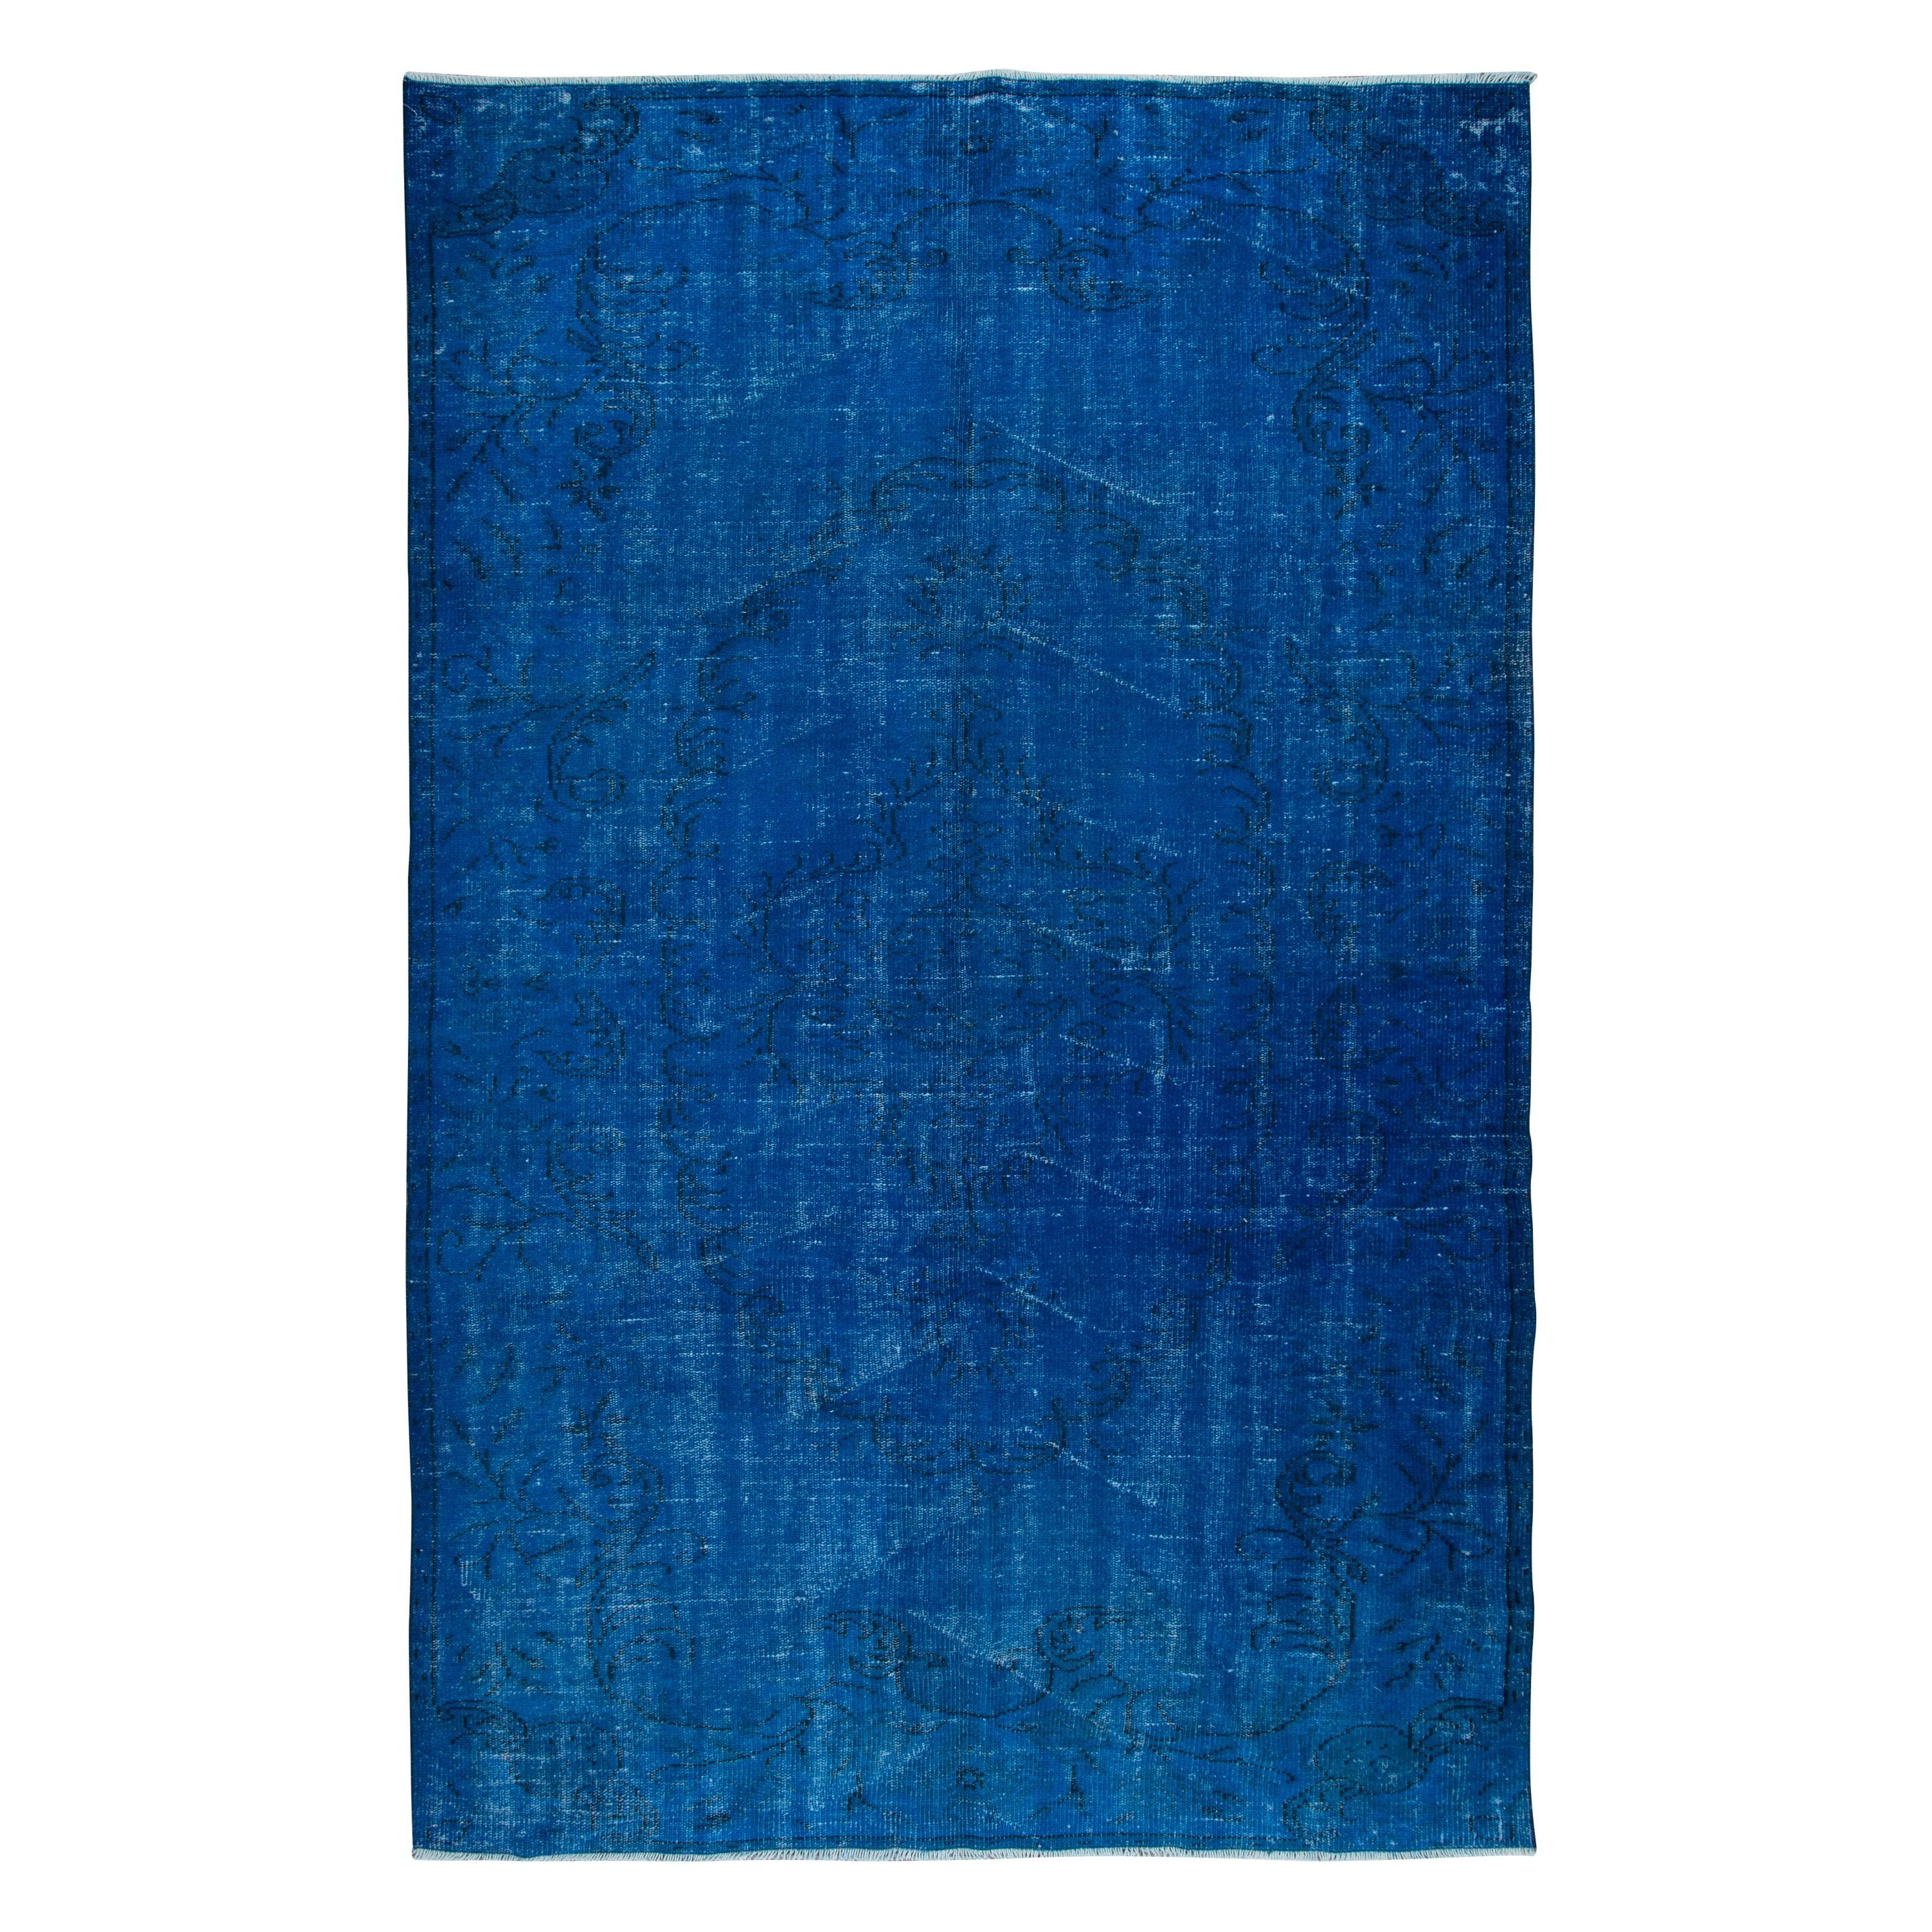 5.7x9.4 Ft Modern Blue area rug, Handwoven and Handknotted in Isparta, Turkey For Sale